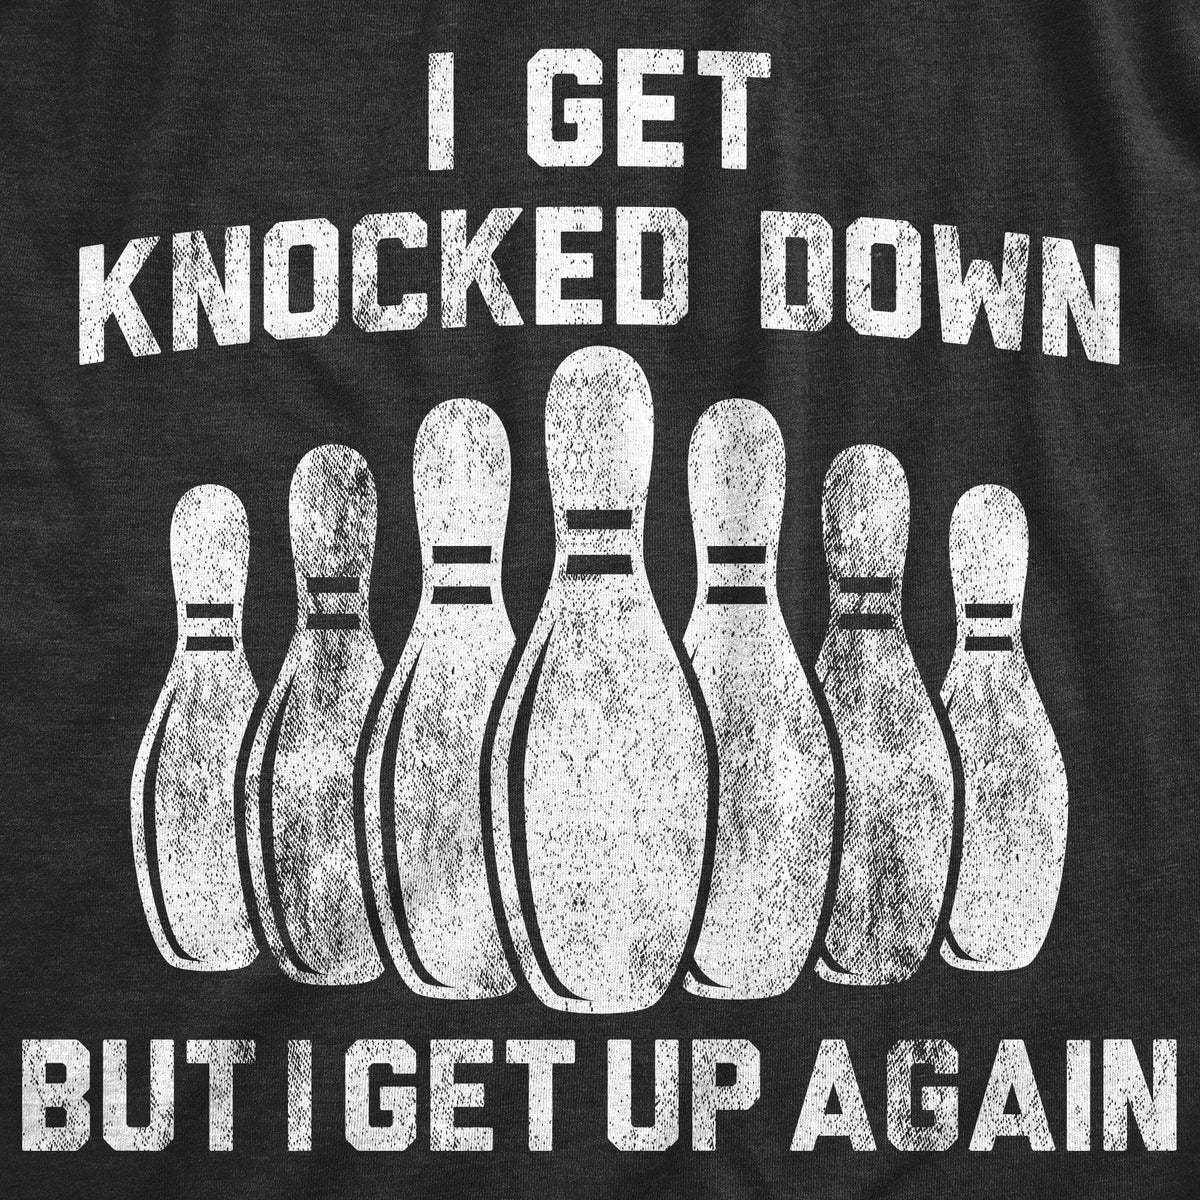 I Get Knocked Down But I Get Up Again Women&#39;s Tshirt - Crazy Dog T-Shirts